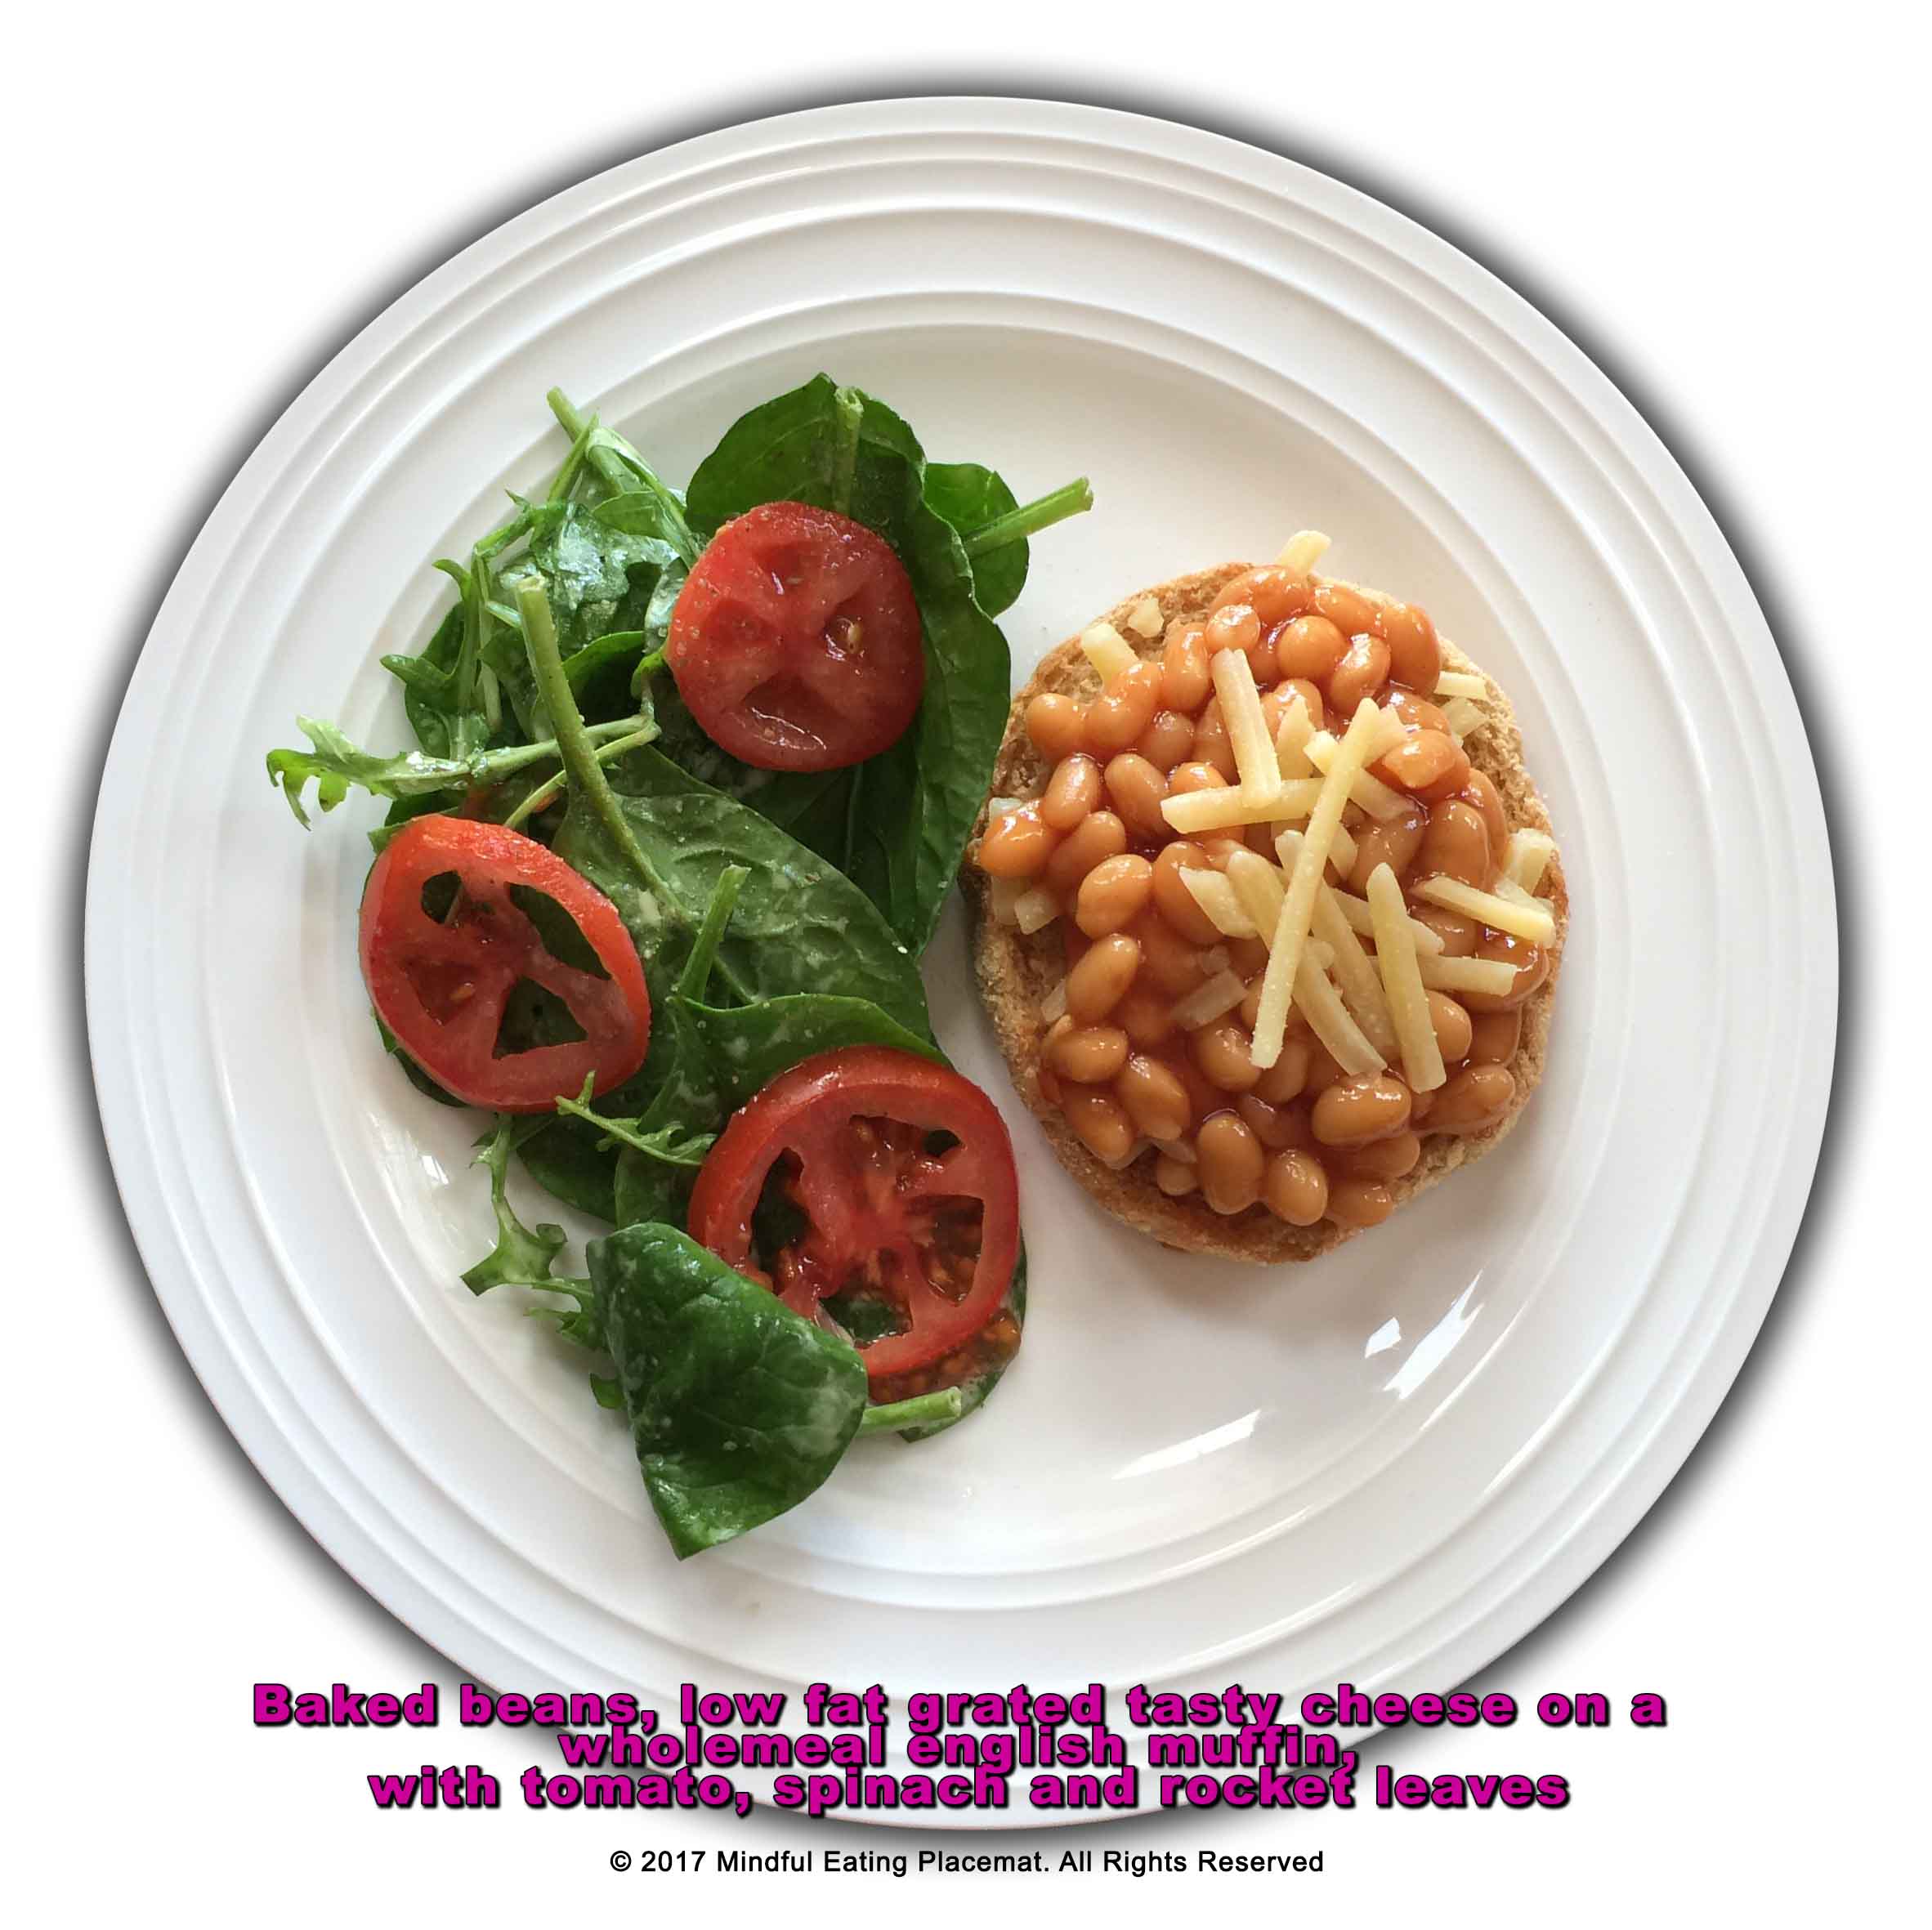 Wholemeal muffin with cheese, baked beans and tomato and spinach salad